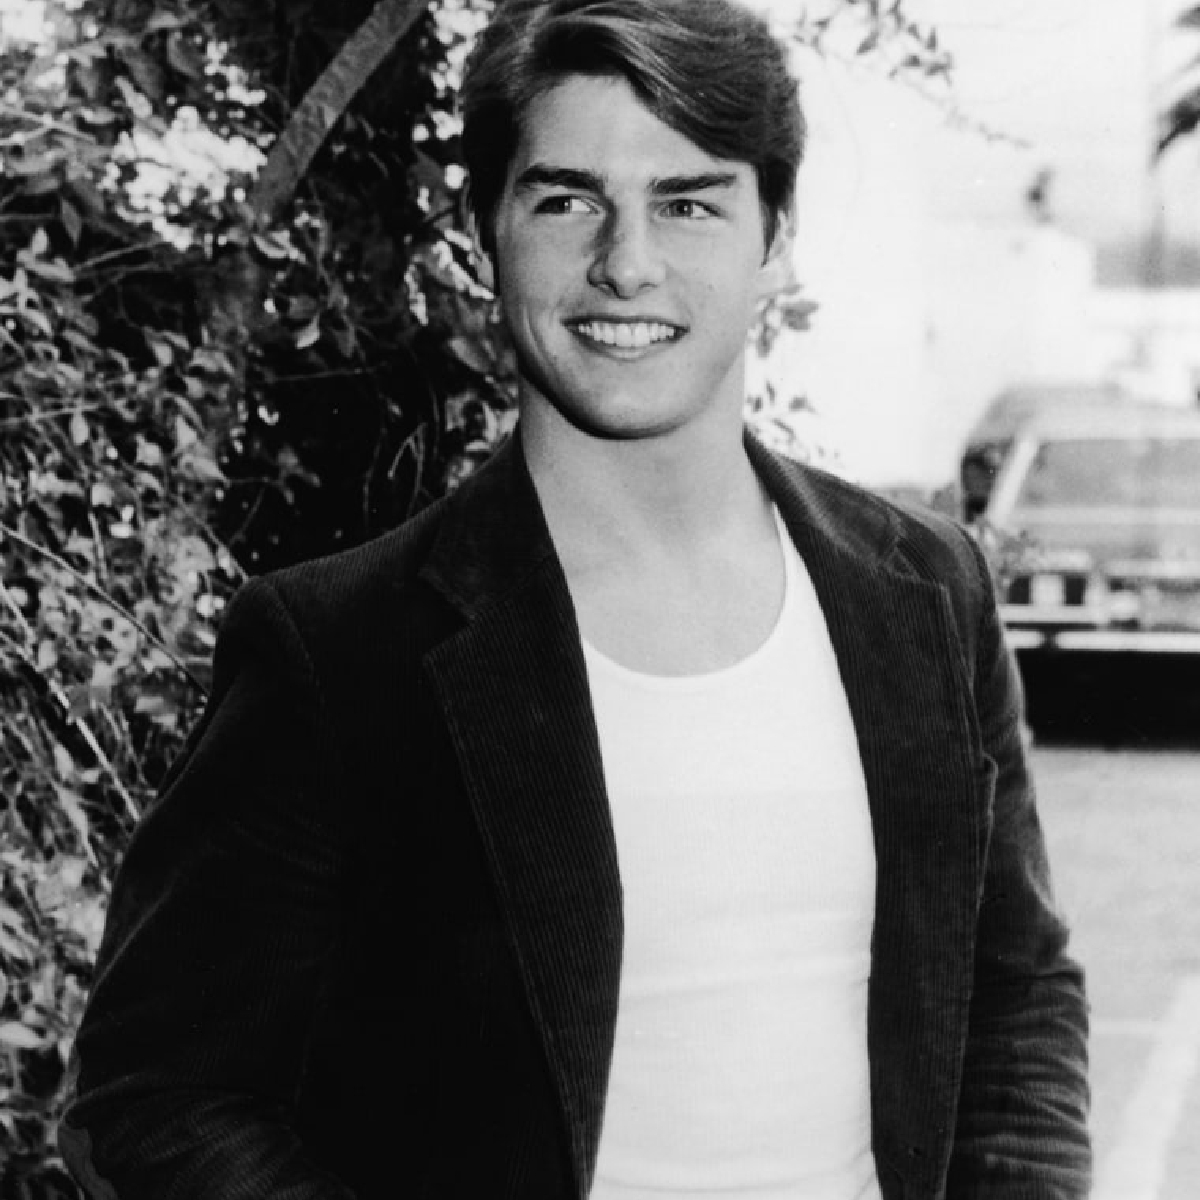 Tom Cruise in his youth